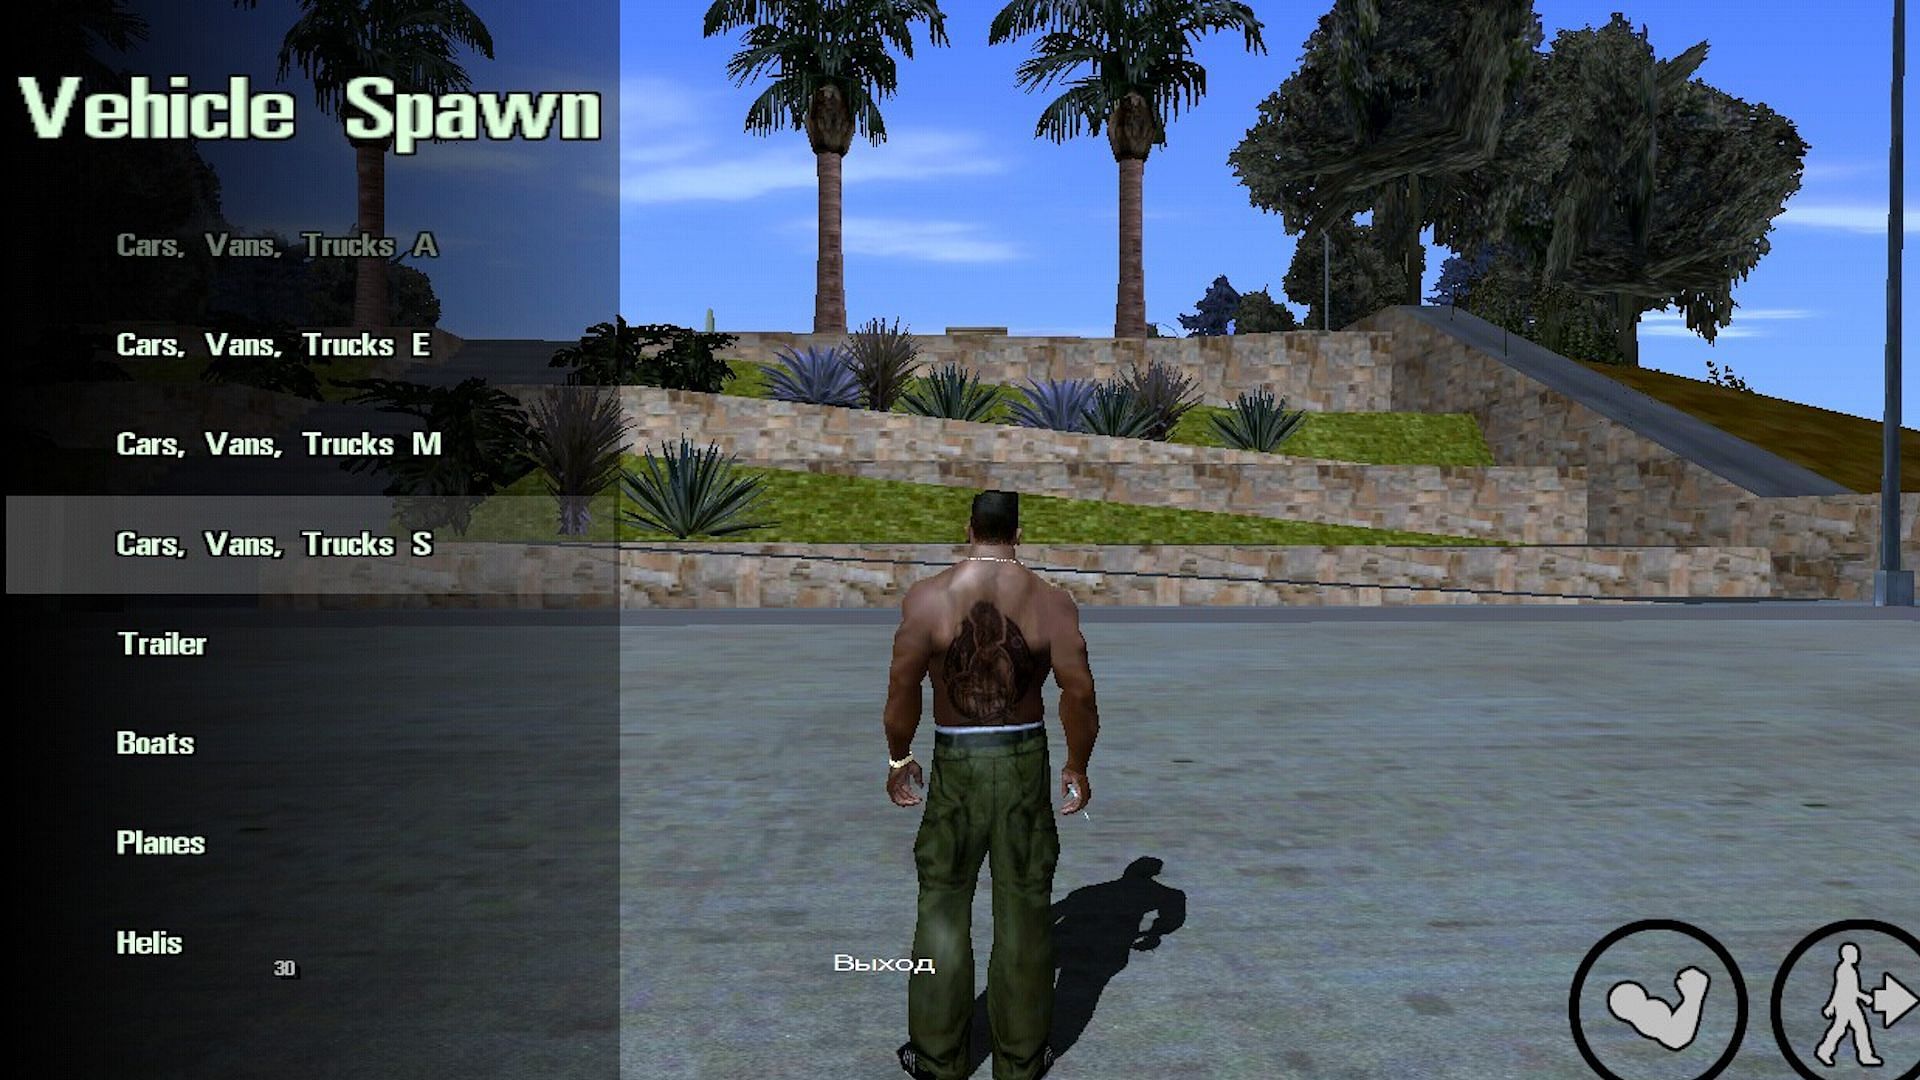 How To Use Cheats In GTA San Andreas Android?